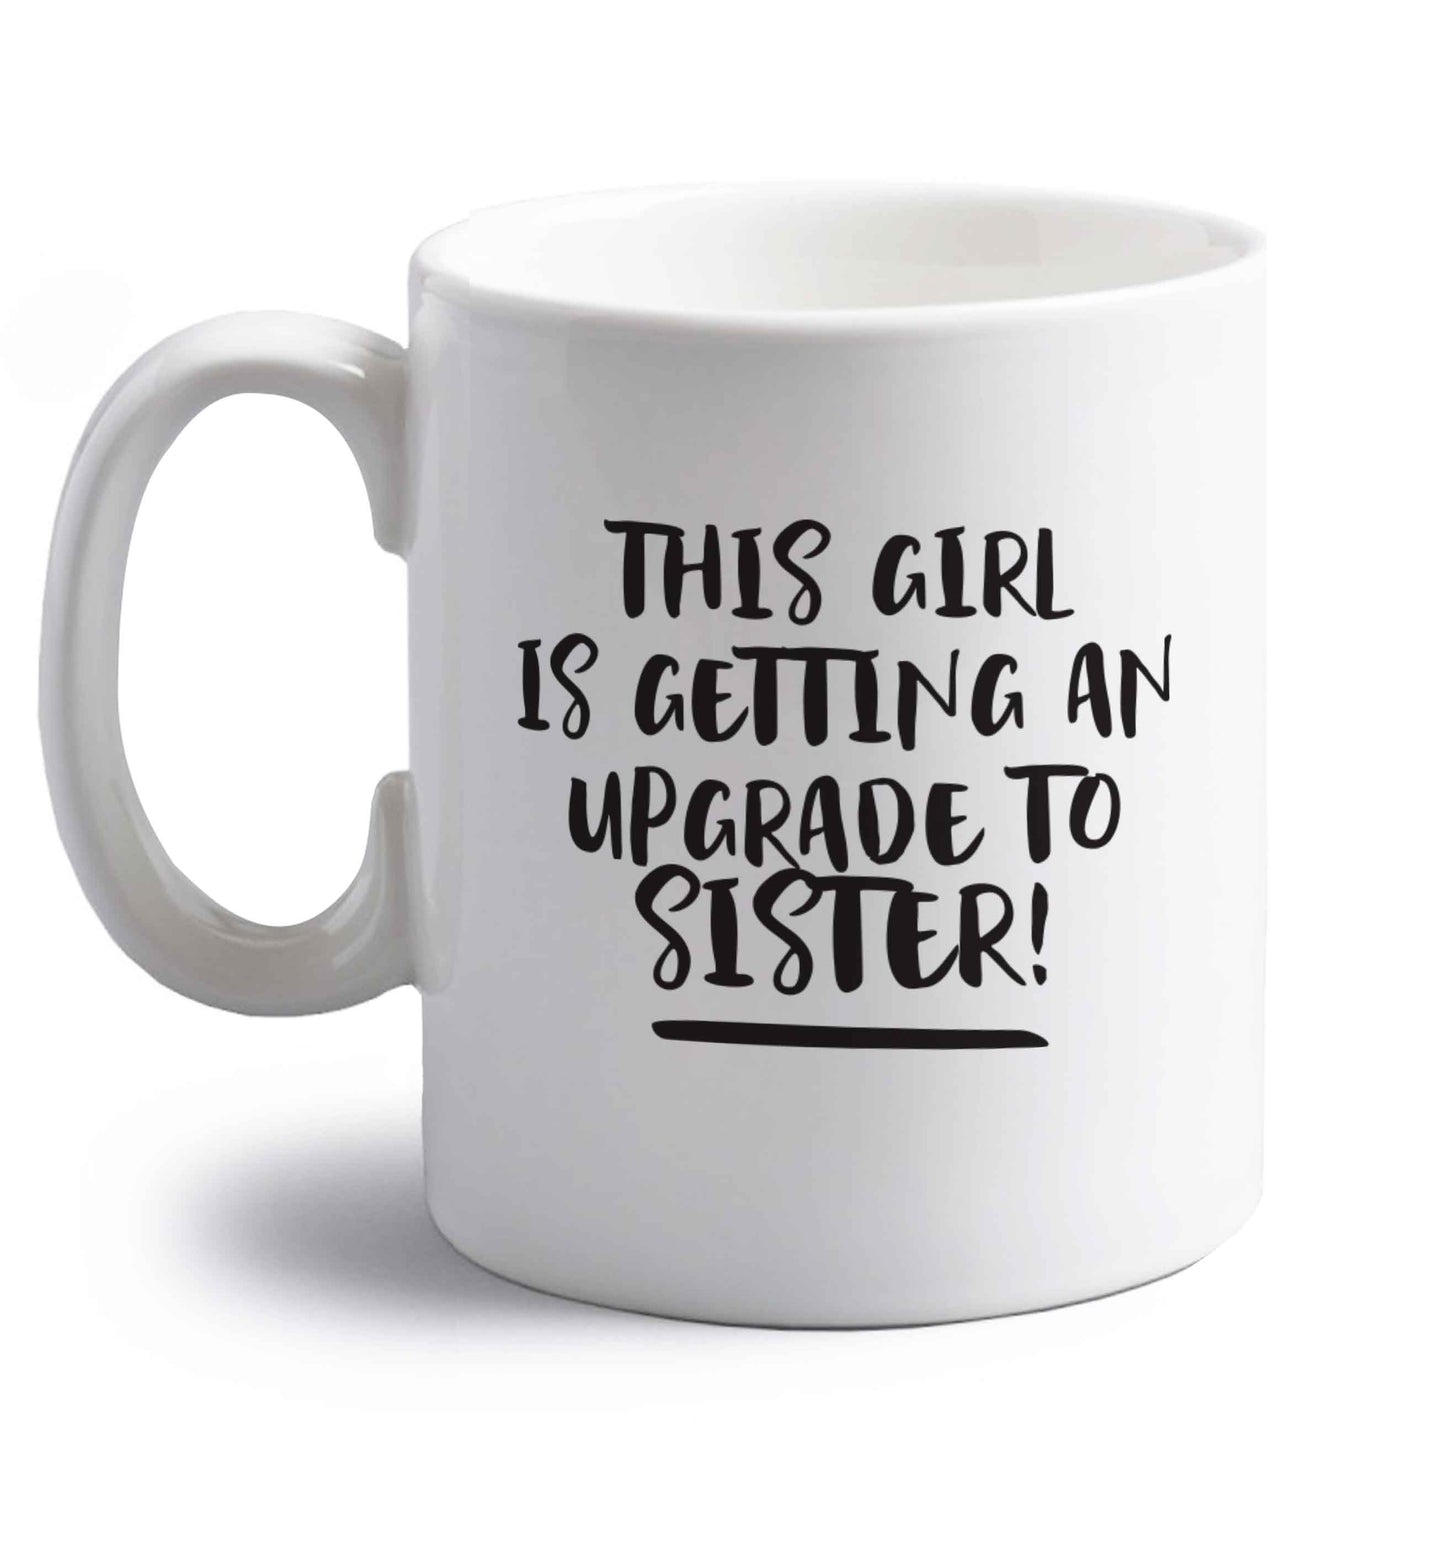 This girl is getting an upgrade to sister! right handed white ceramic mug 